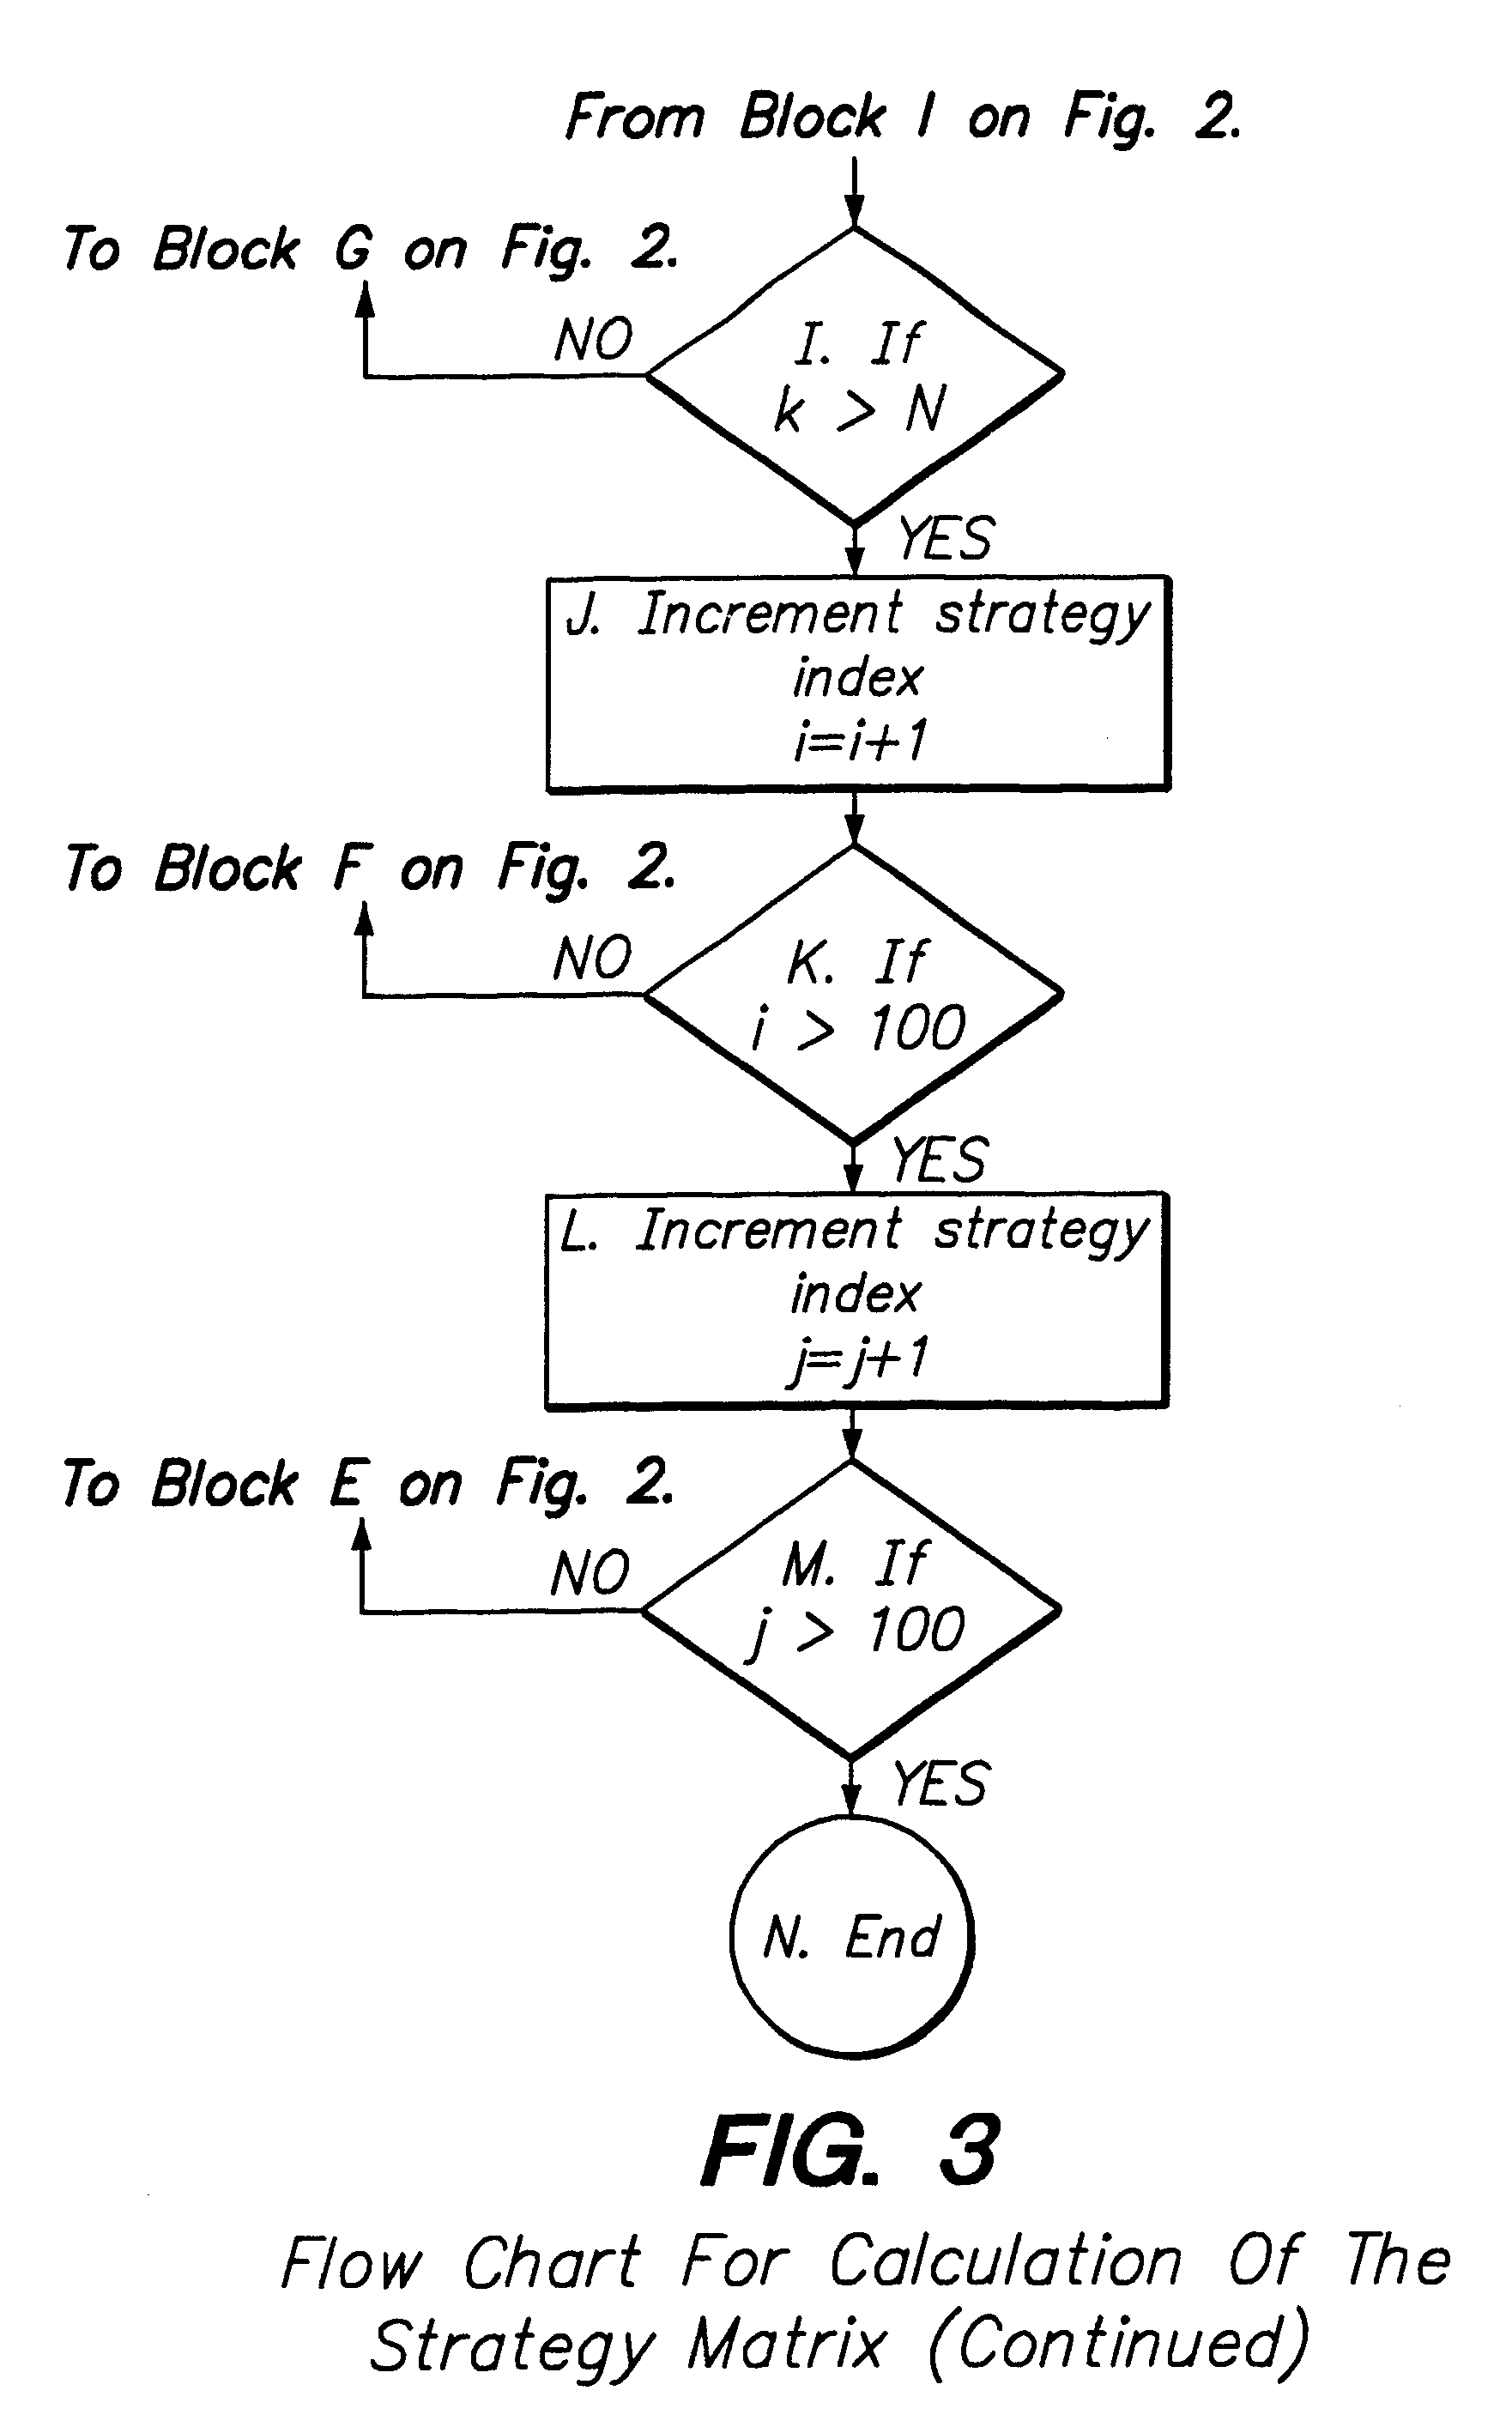 Method and system for visual analysis of investment strategies